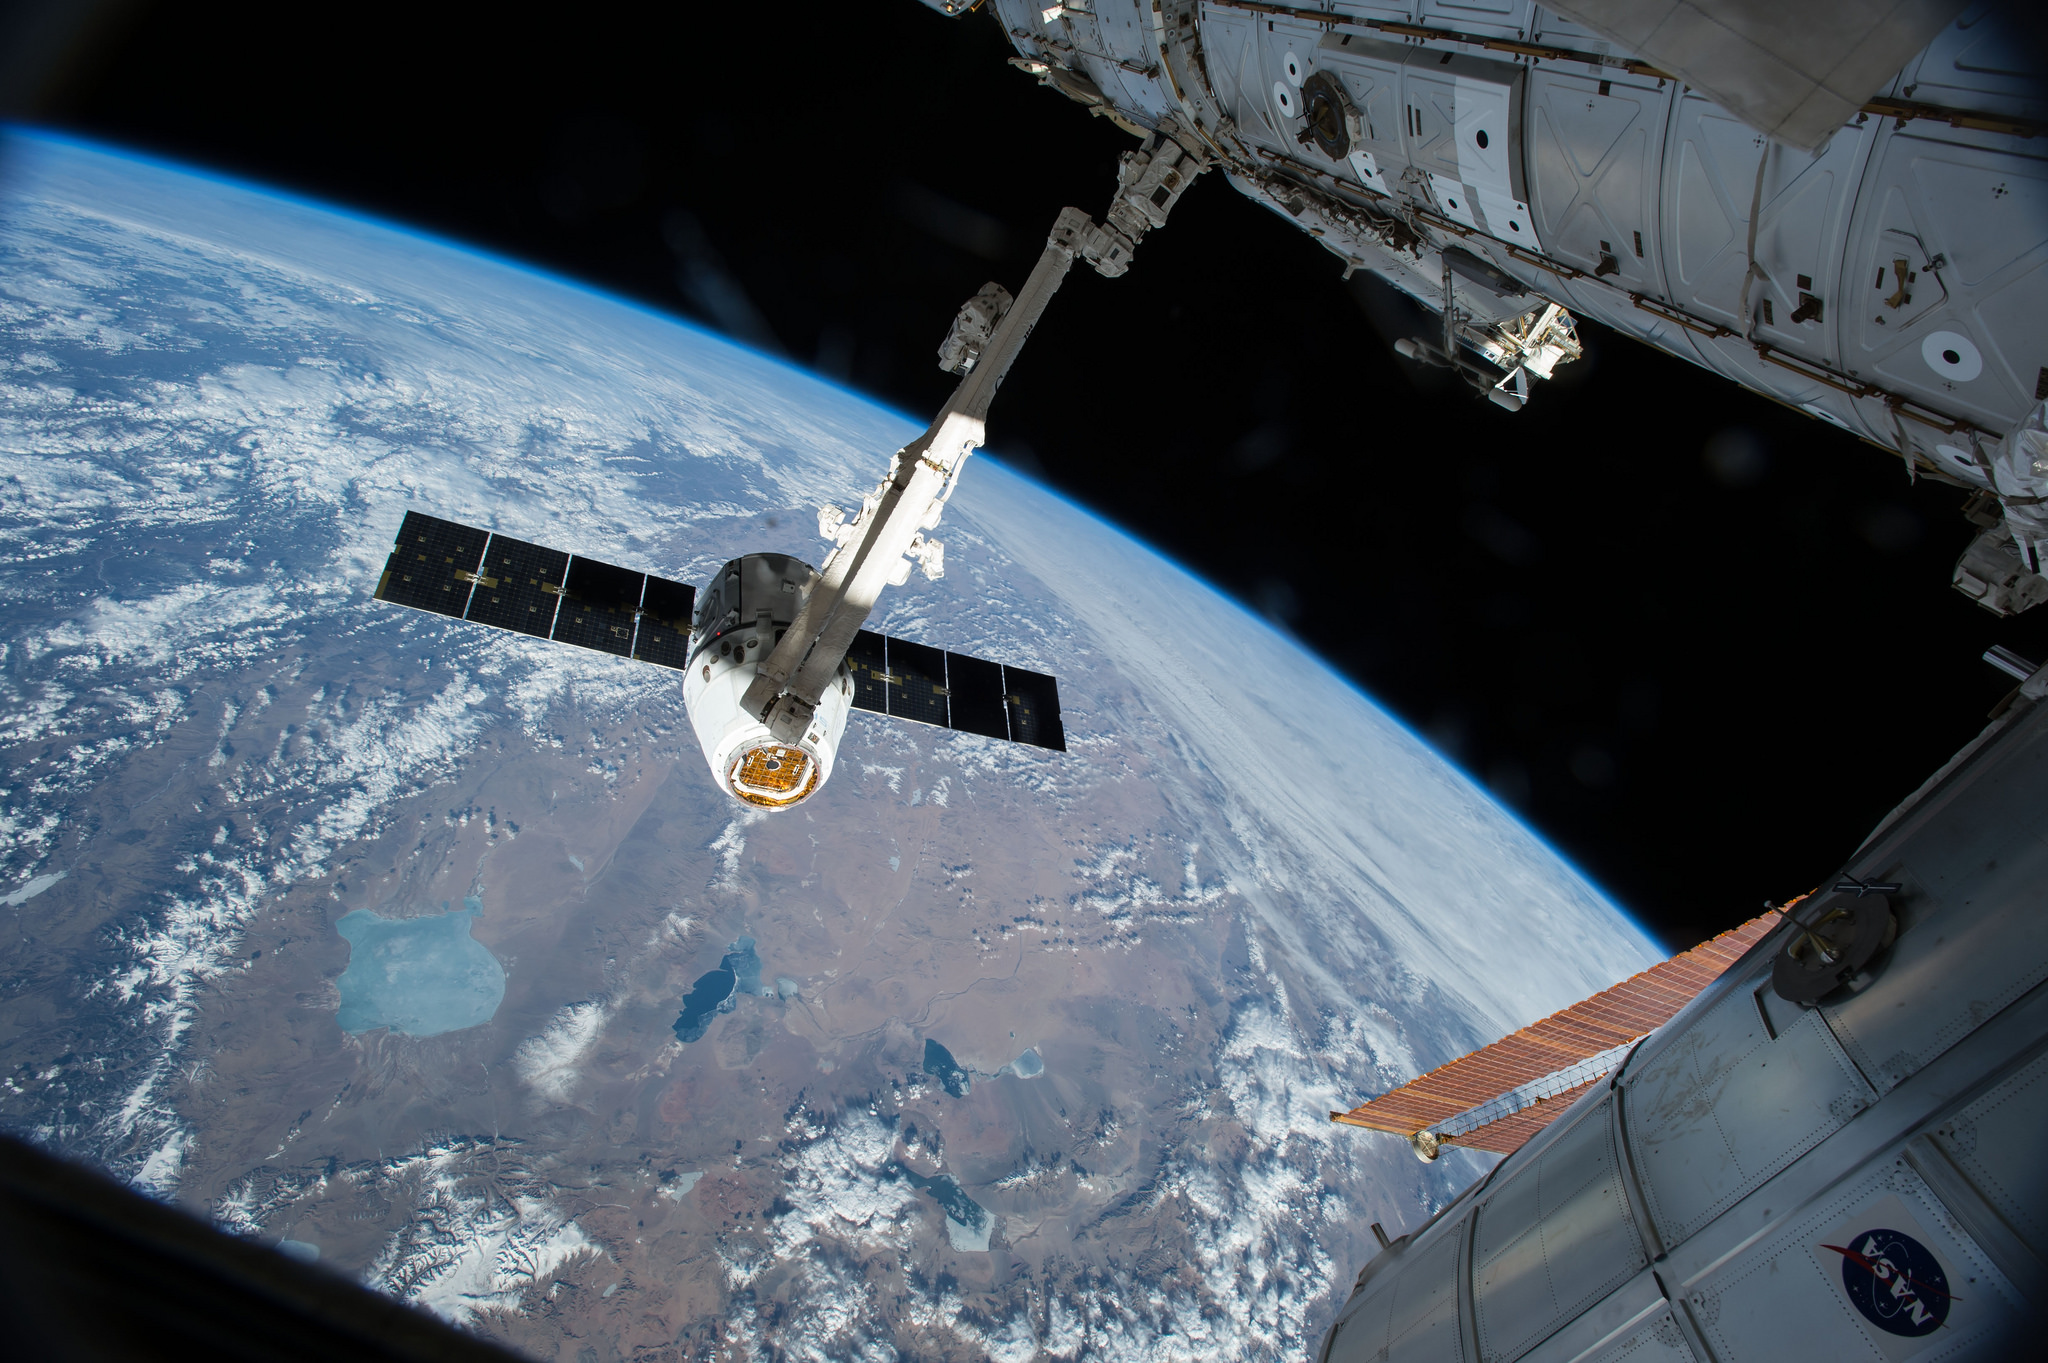 Canadarm 2 Grapples the SpaceX Dragon